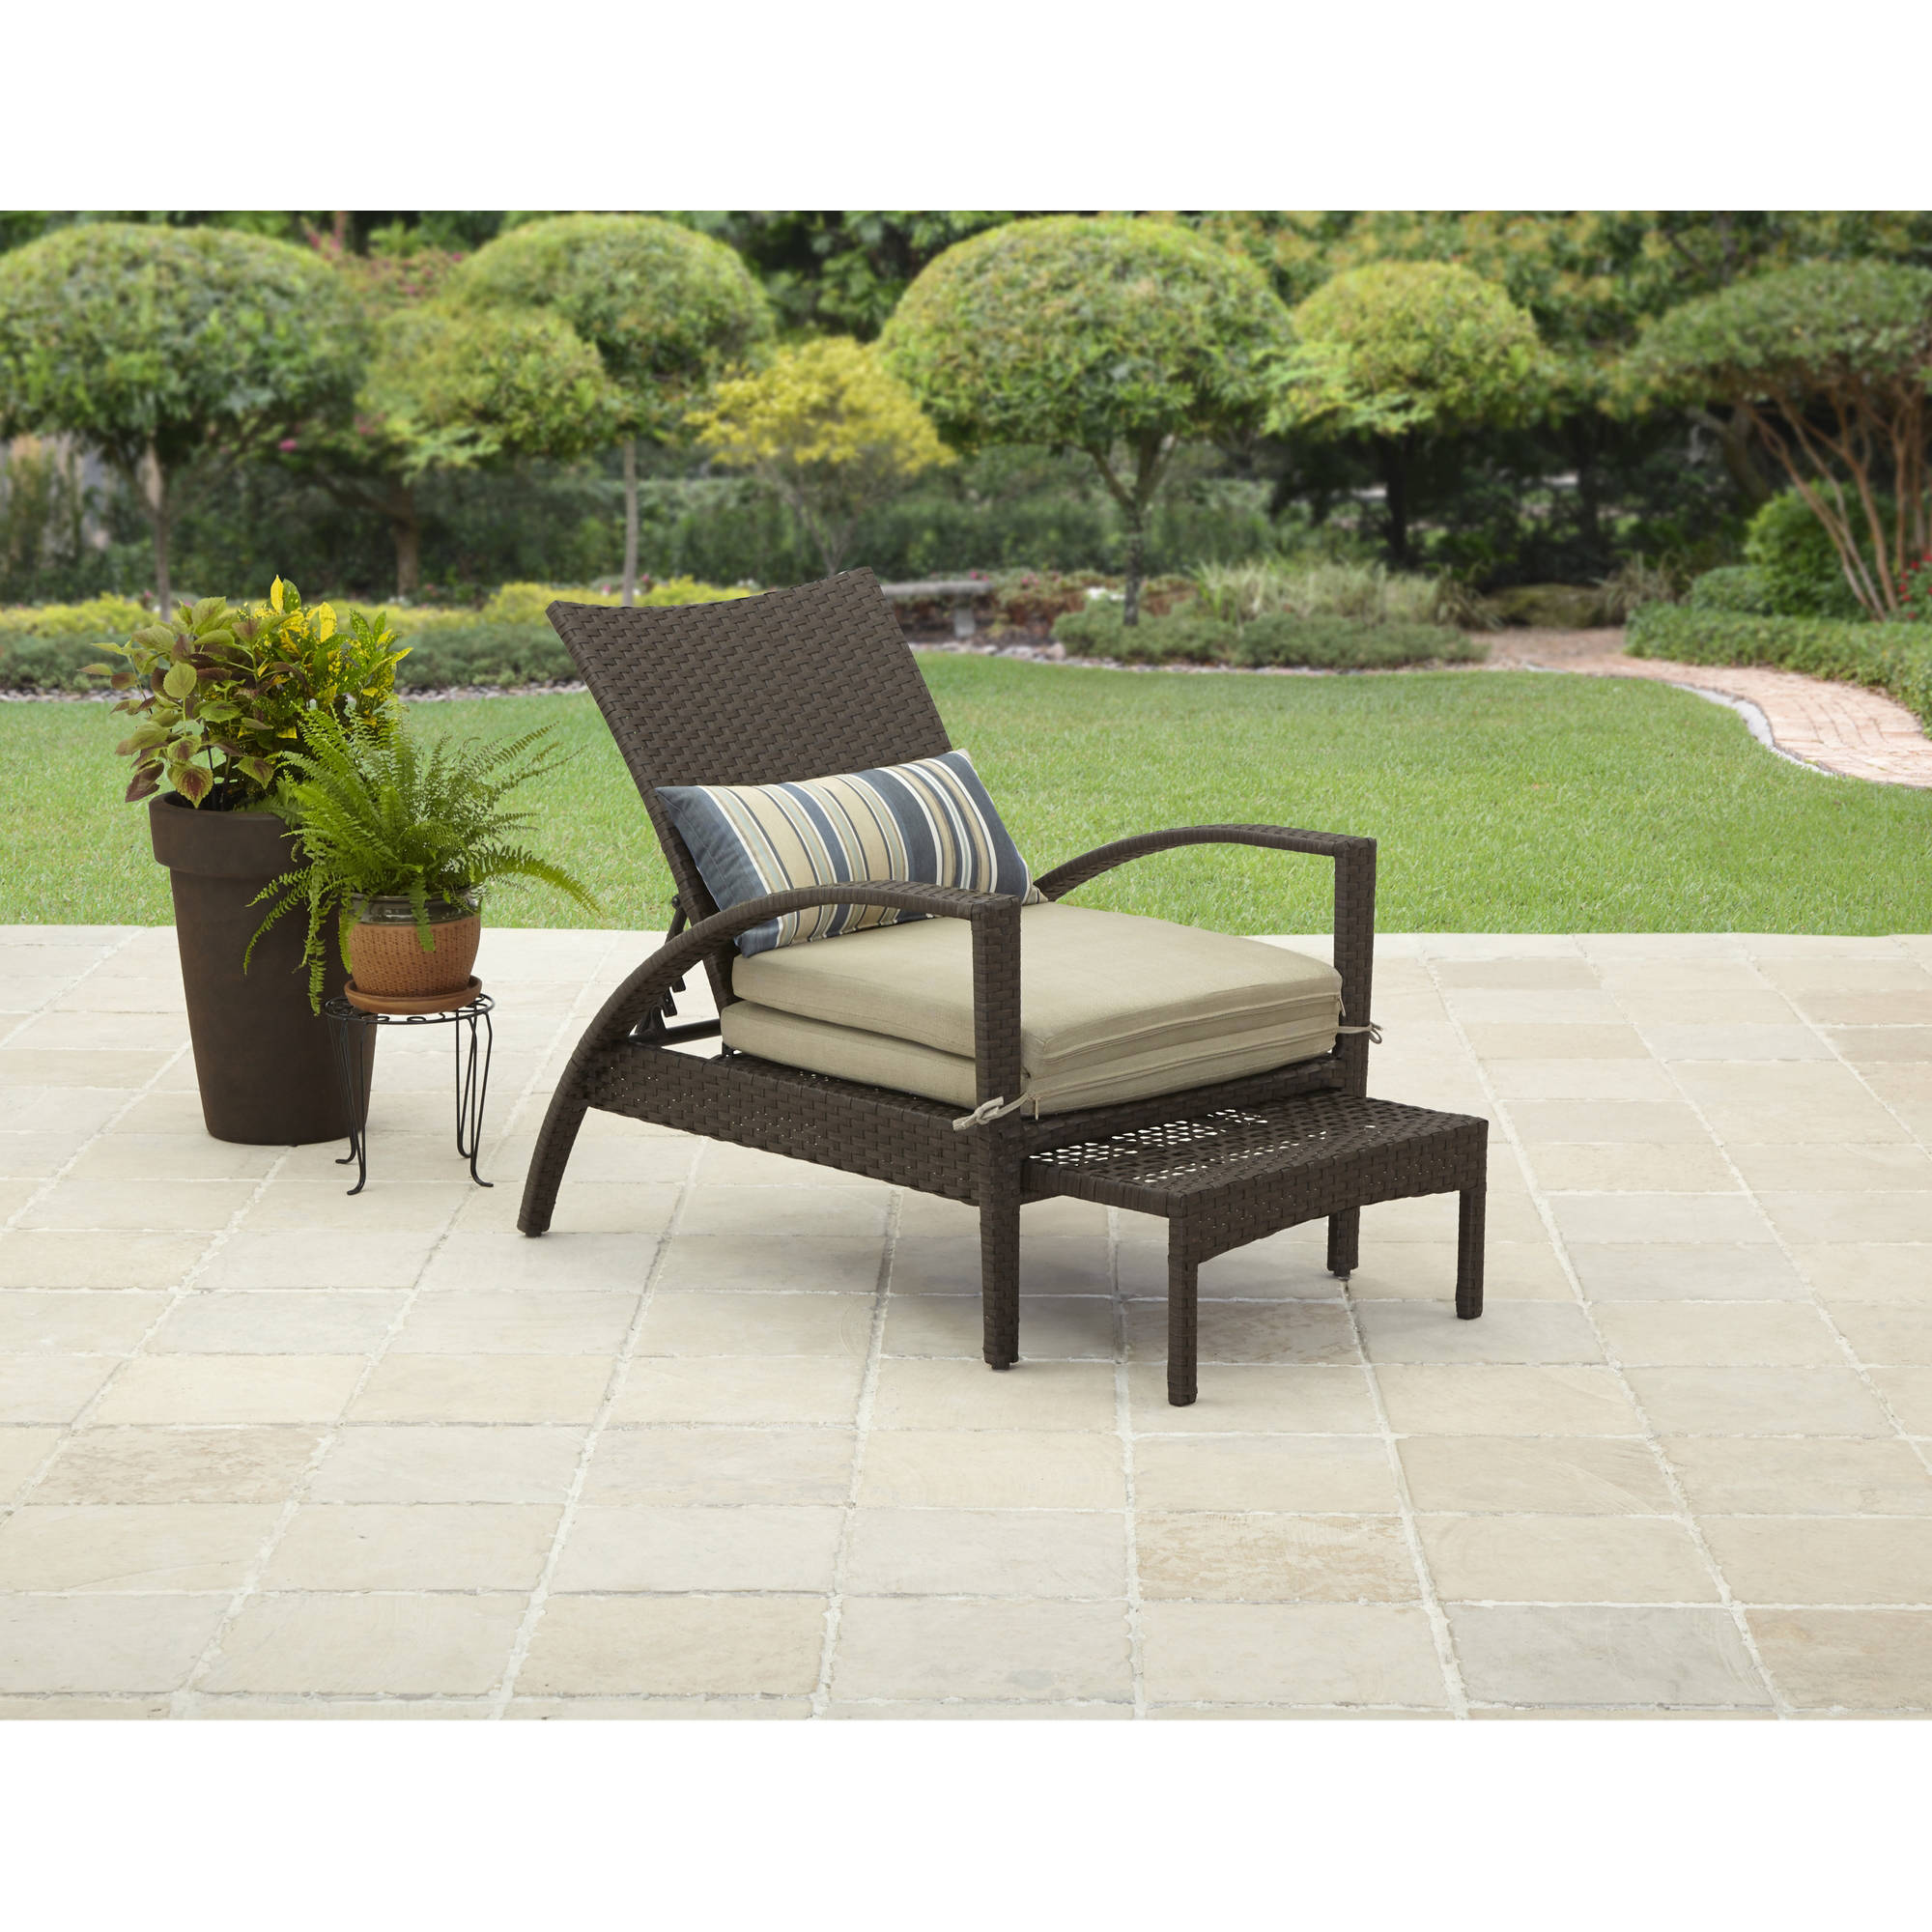 patio furniture for less photo - 1